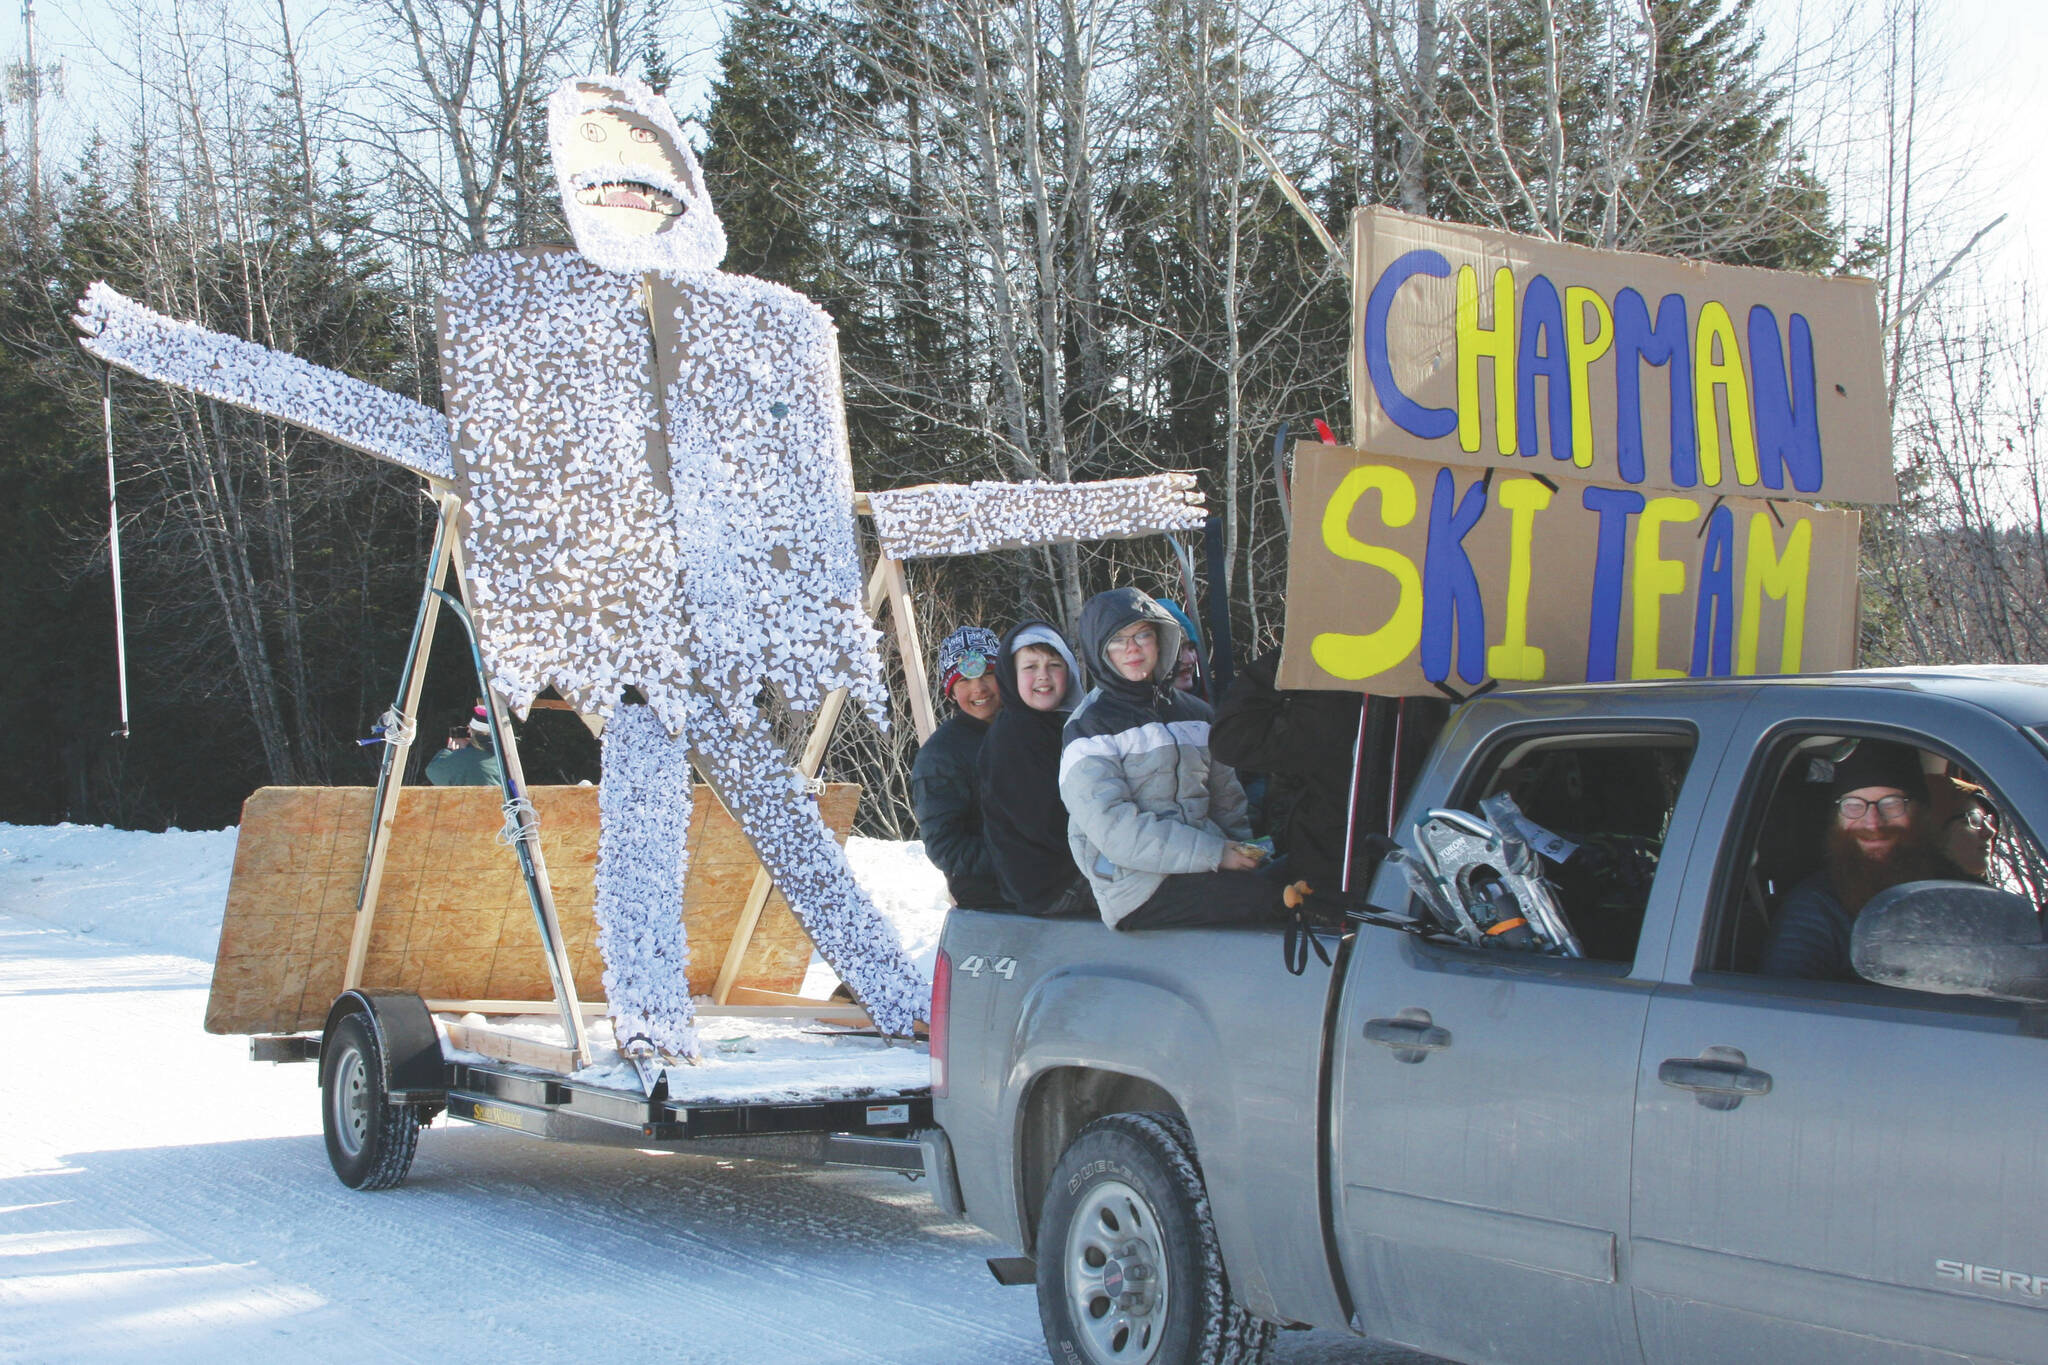 The Chapman ski team’s float proceeds down School Street during the Snow Rondi Parade on Saturday in Anchor Point. (Photo by Delcenia Cosman/Homer News)